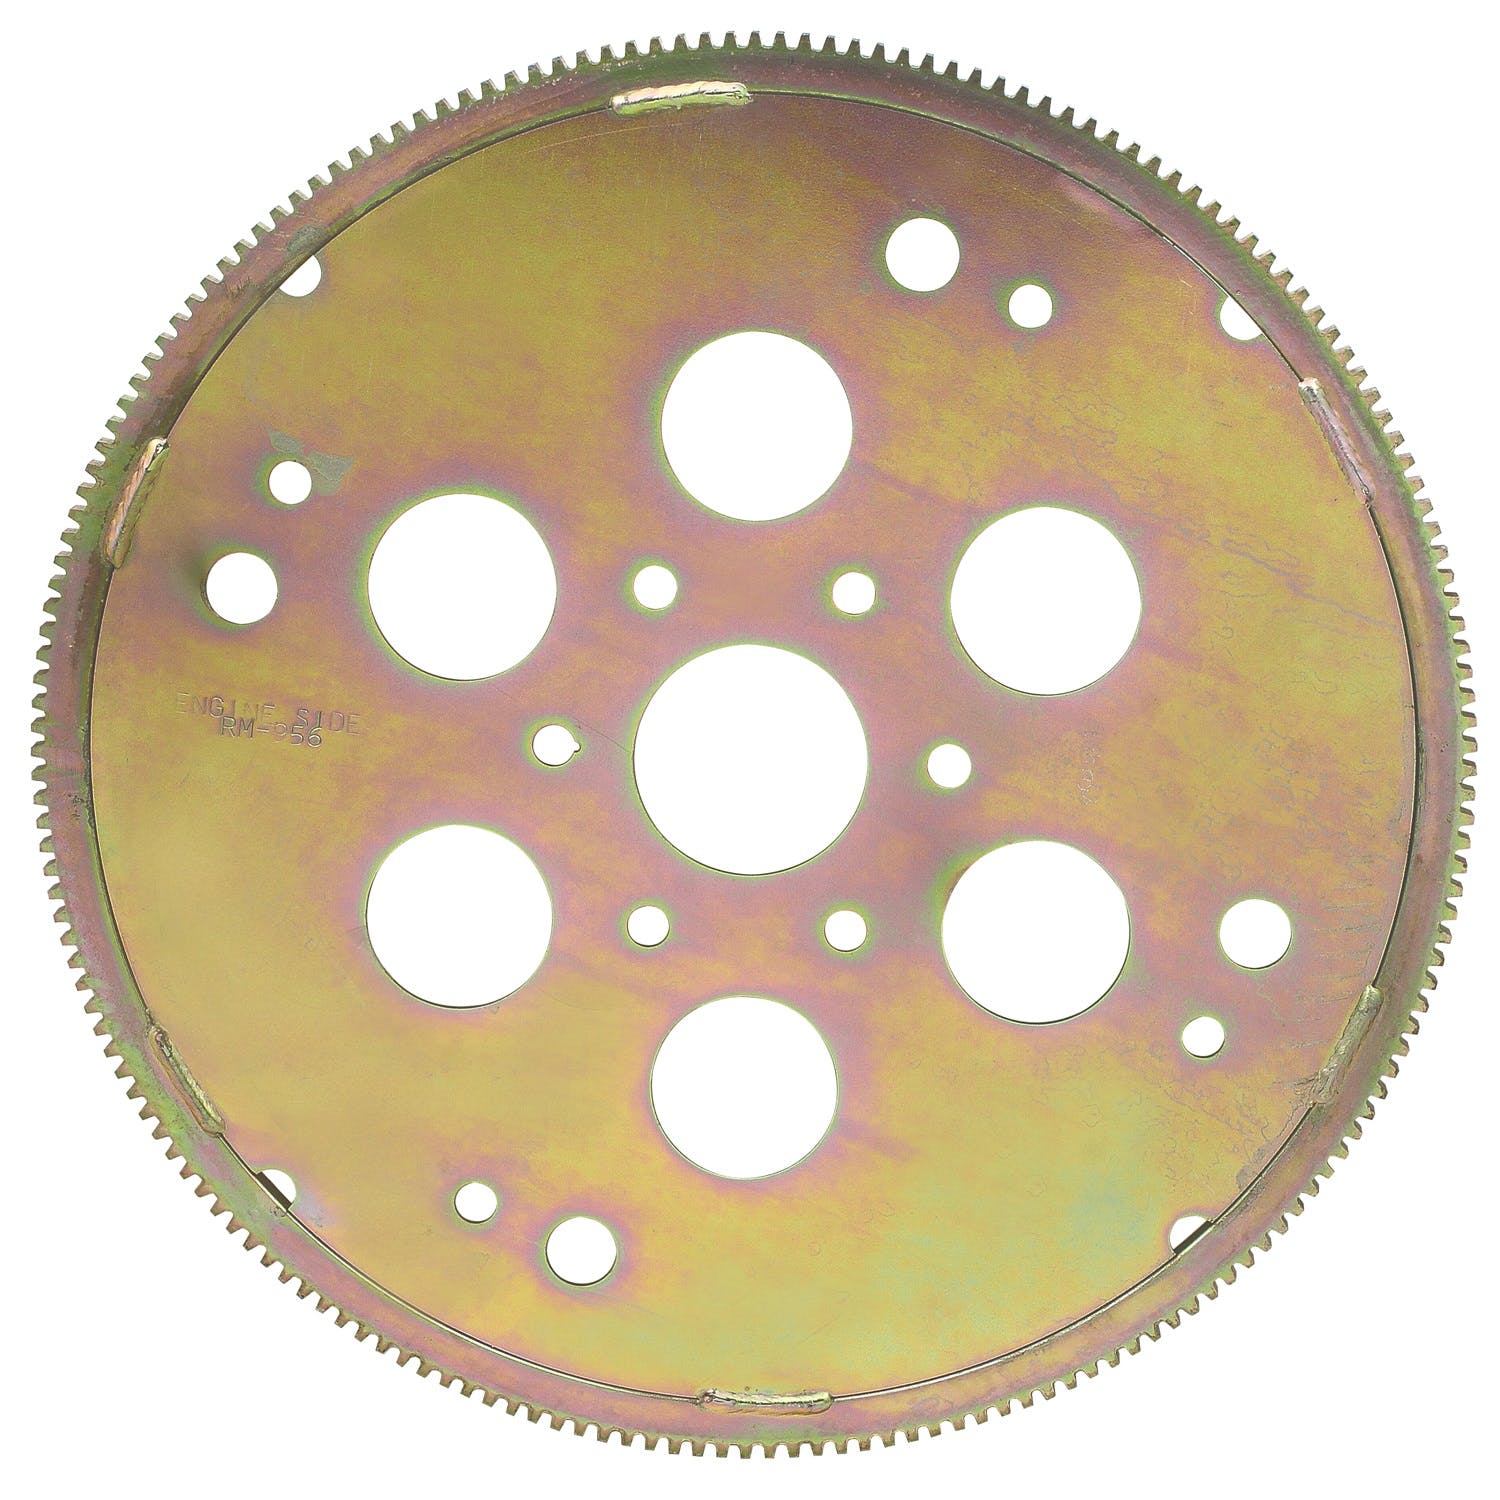 QuickTime RM-956 184 tooth BB Ford Flexplate